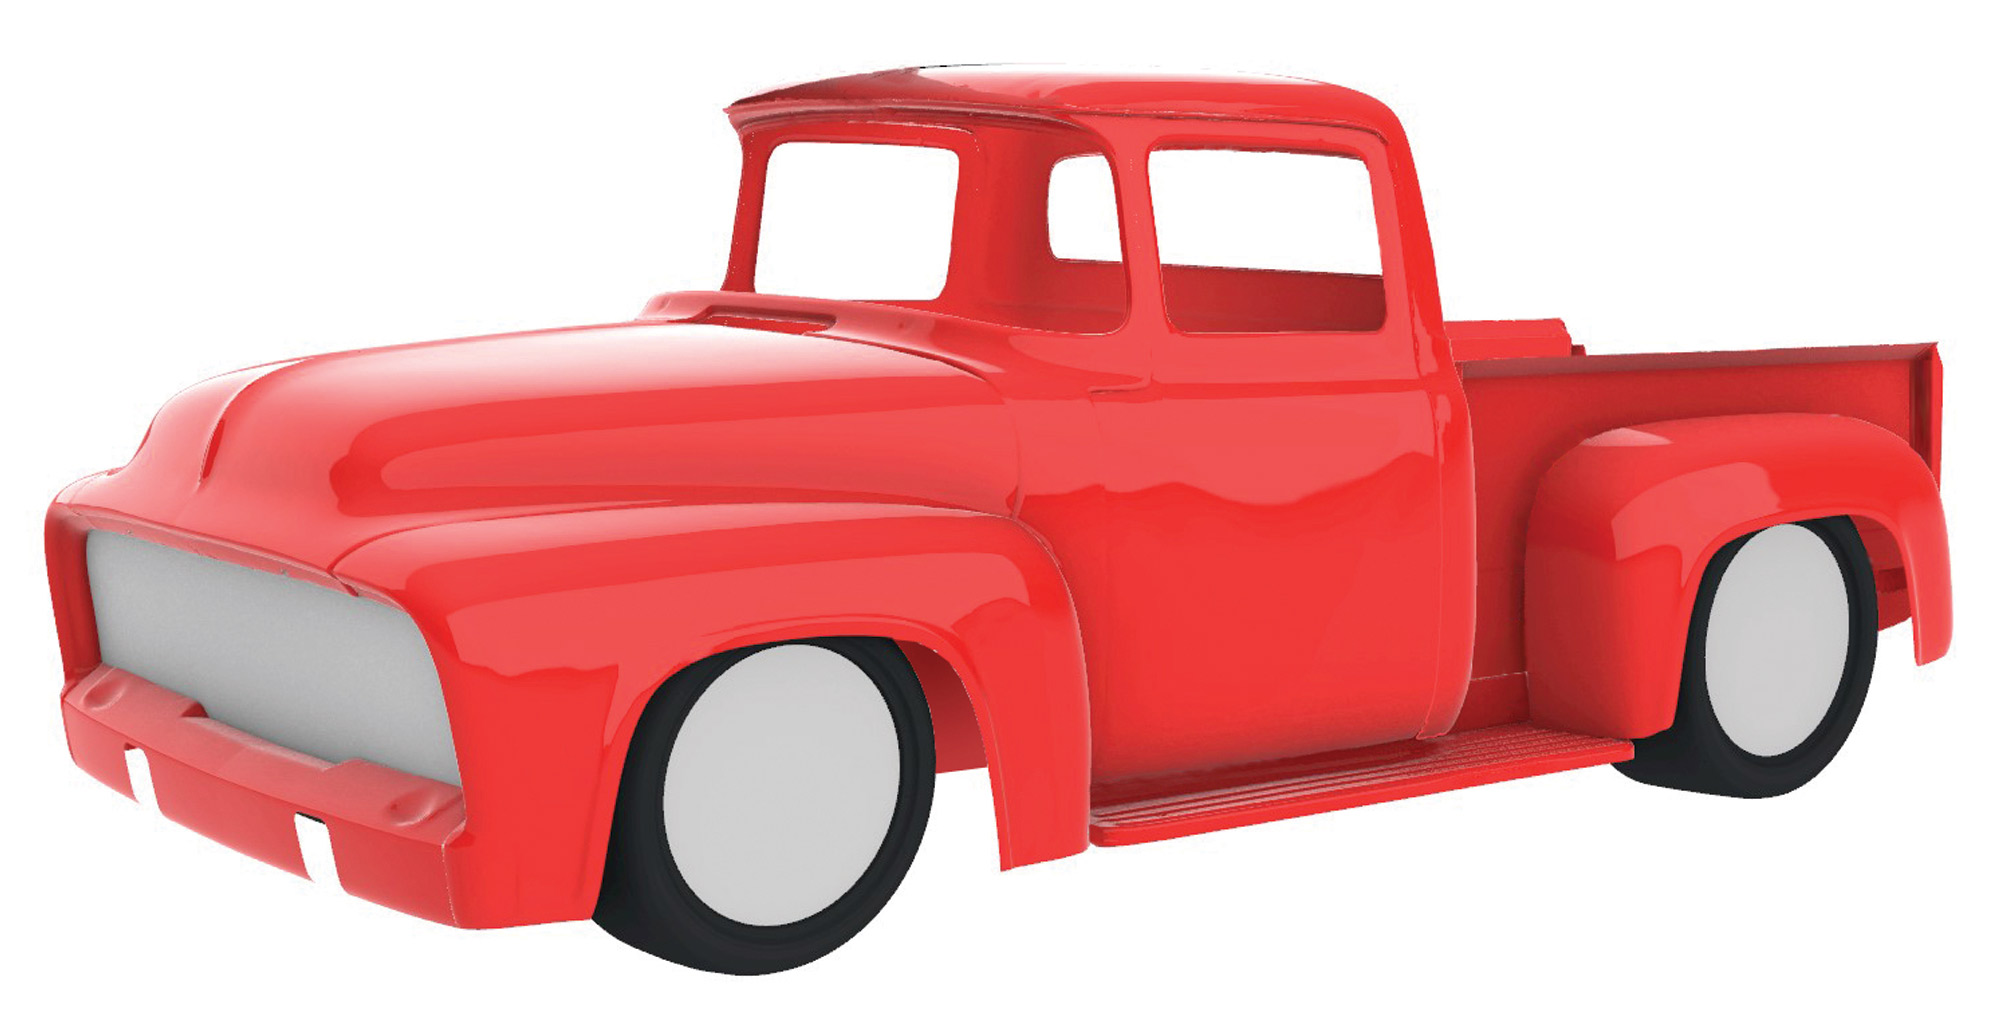 three quarter view of a simple graphic depiction of the truck scan in red on a white background